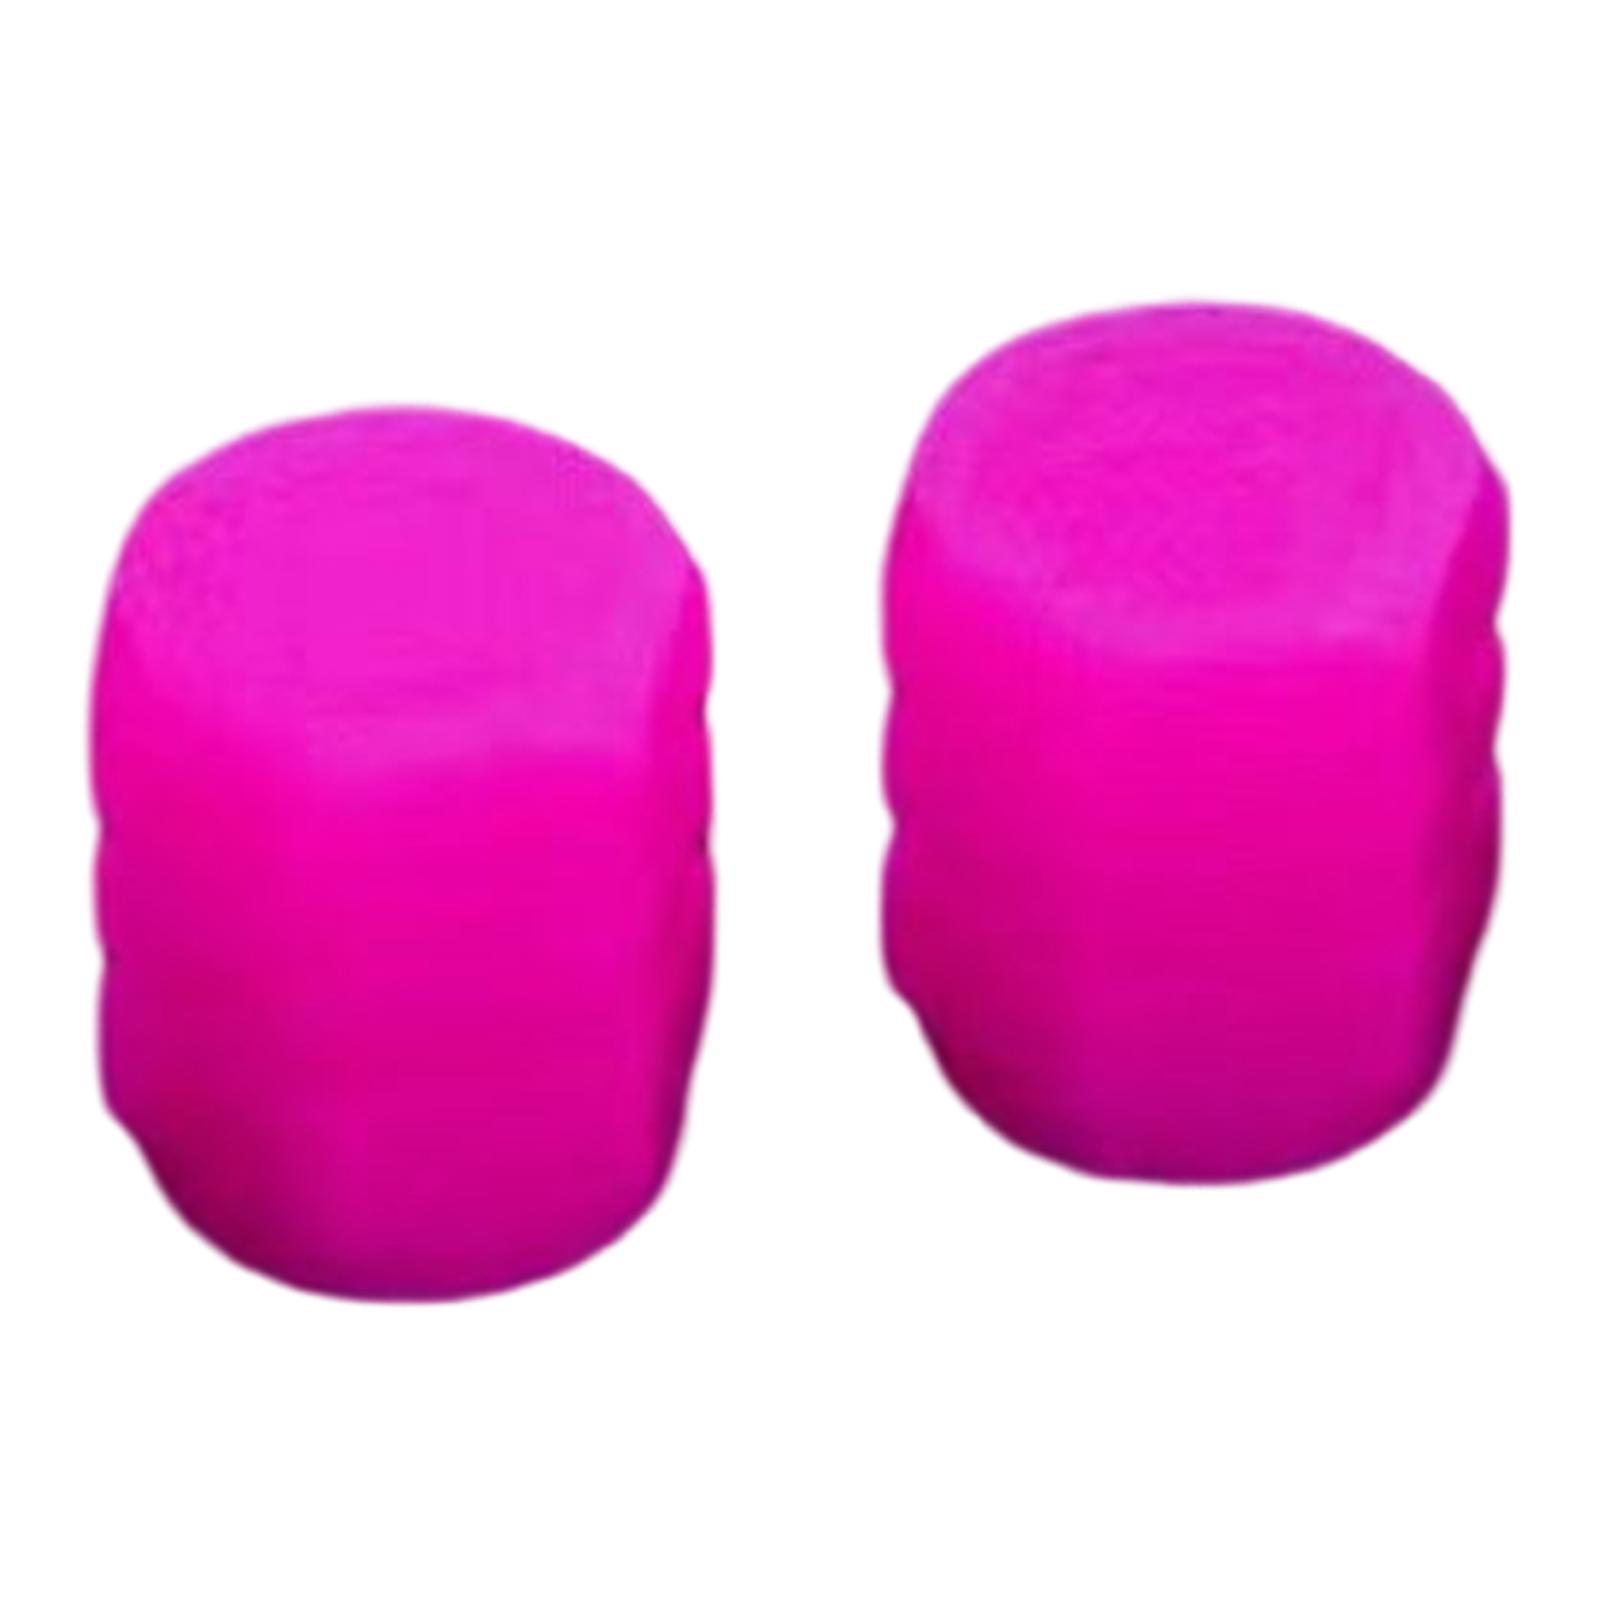 2x Car Valve Caps Covers Luminous for Universal Cars Electric Vehicle Pink